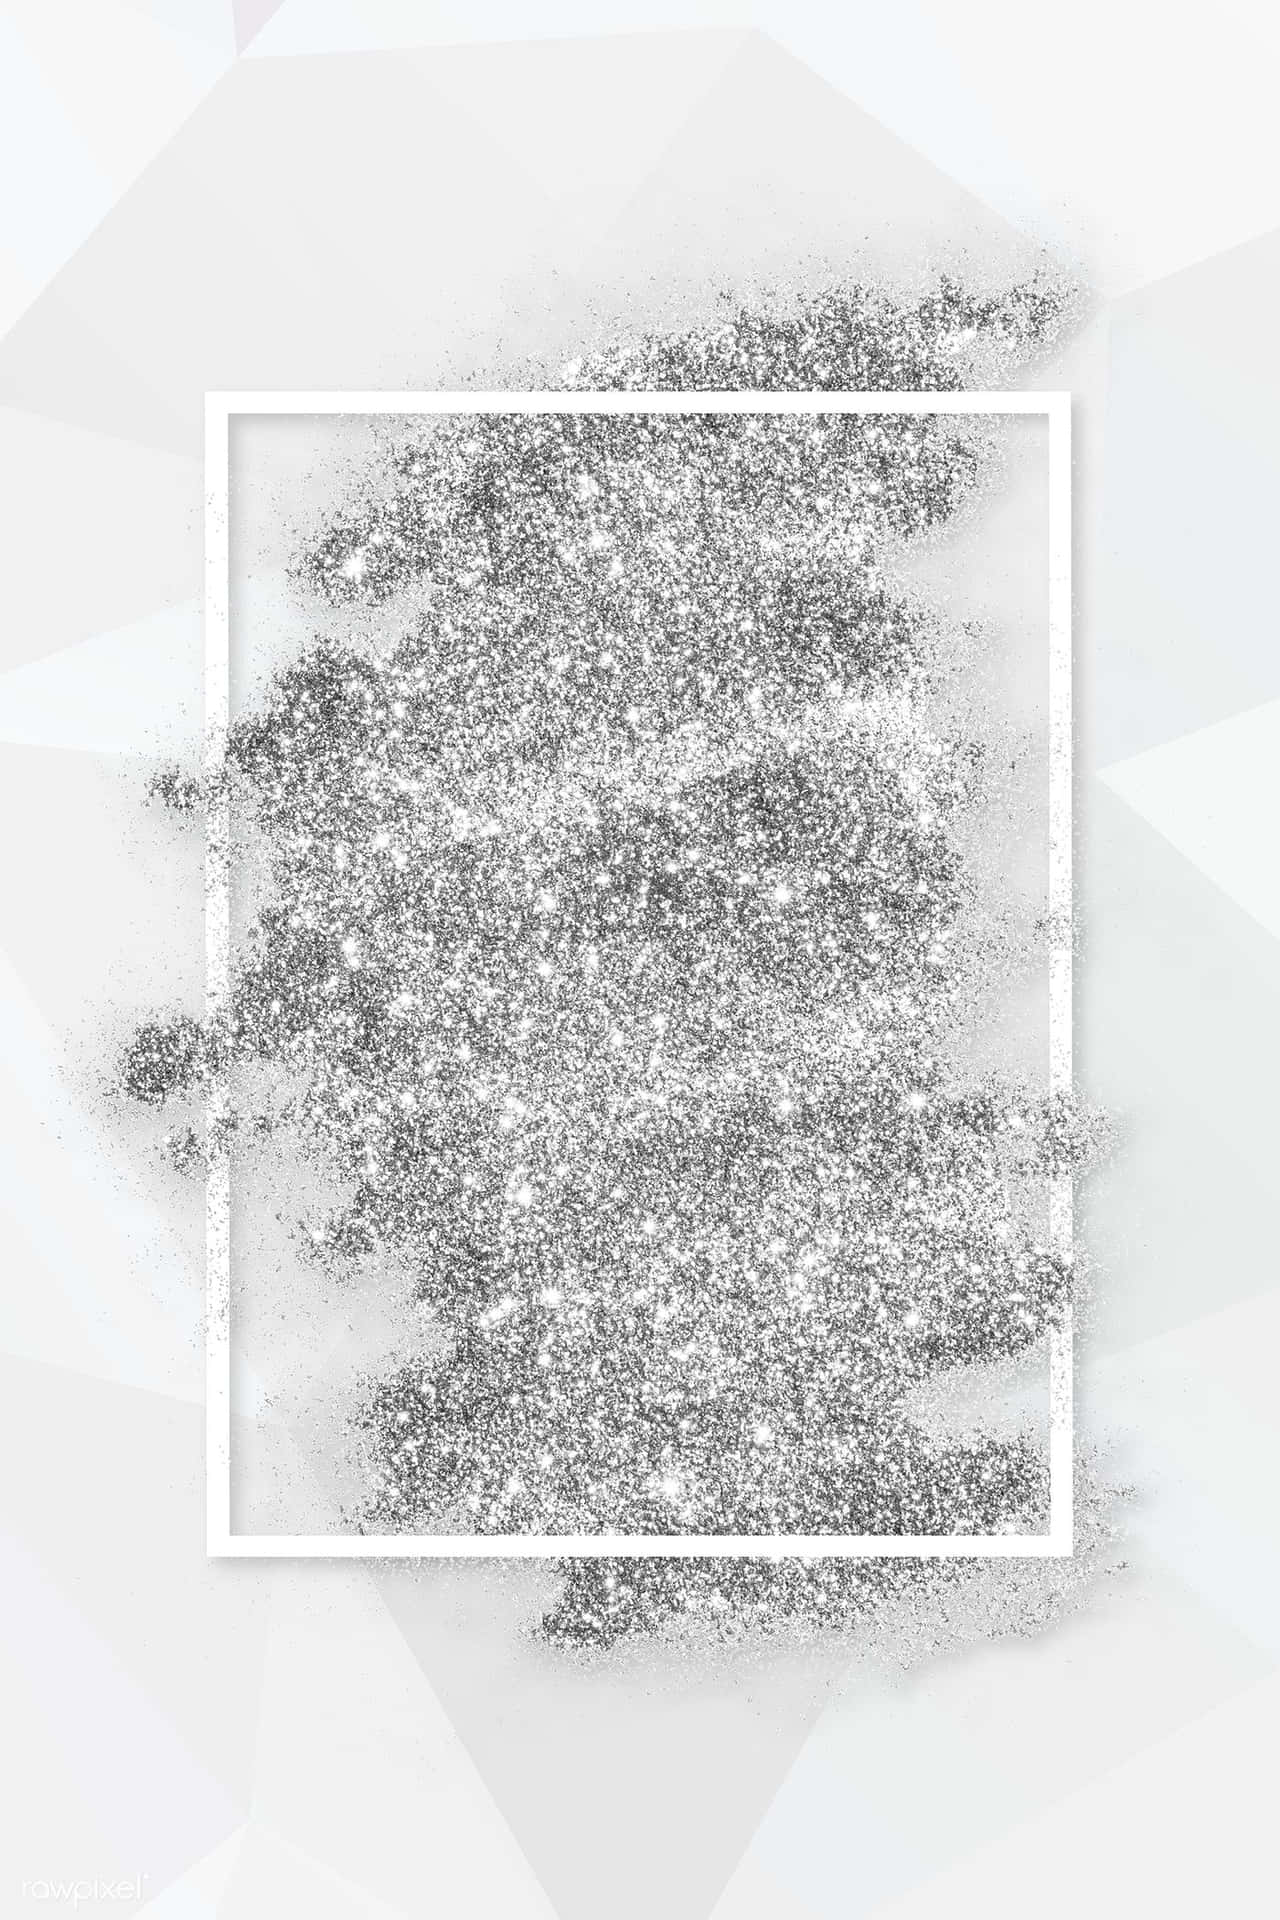 A sparkling display of white glitter thrown into the air Wallpaper